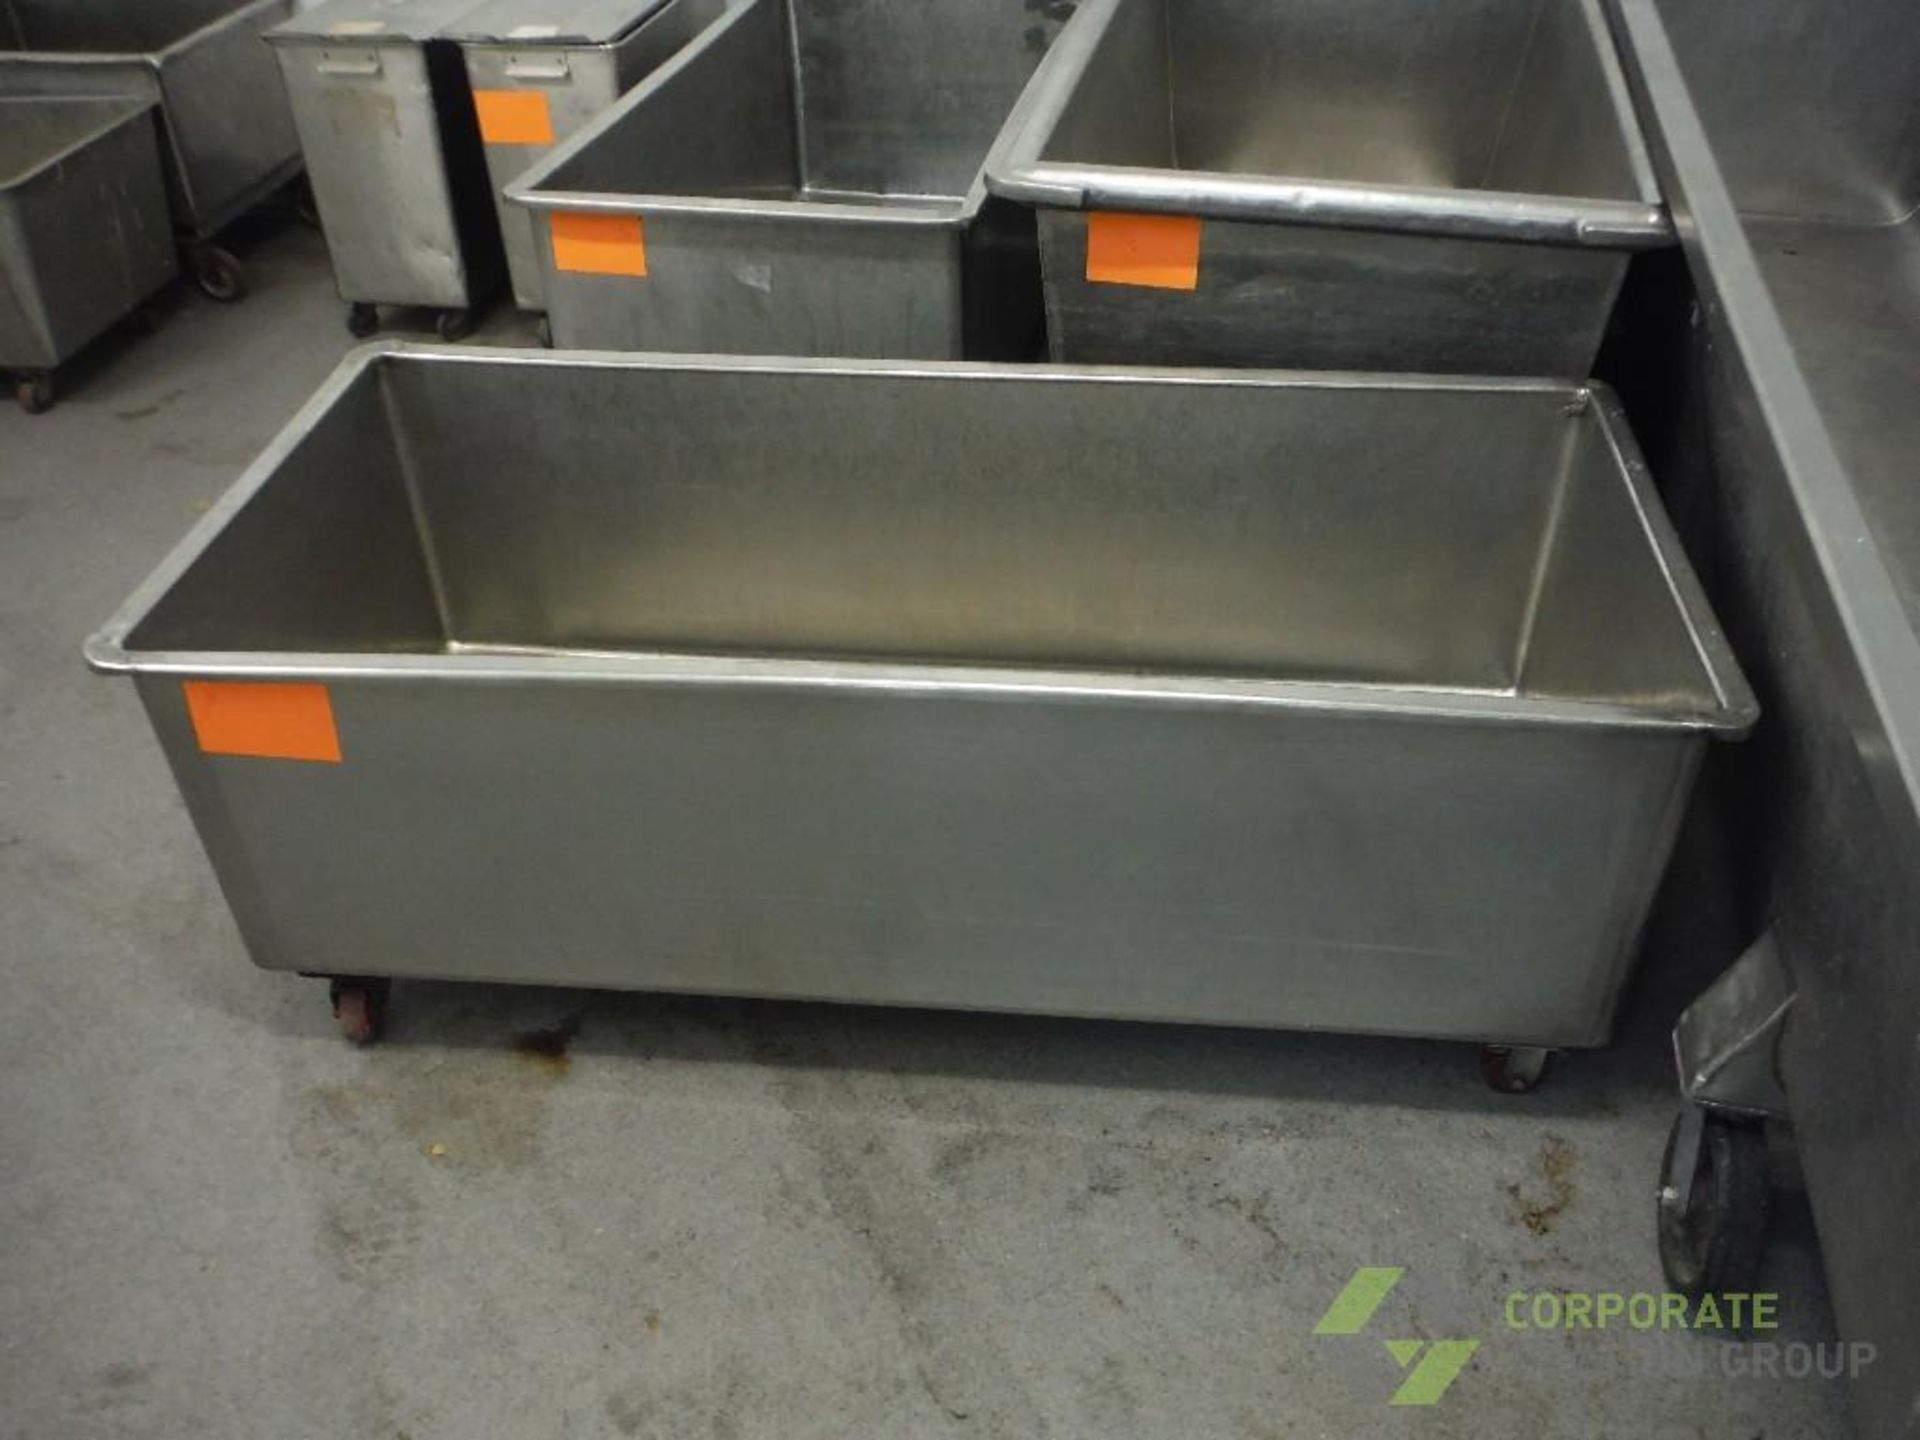 SS trough, 62 in. long x 27 in. wide x 19 in. tall, on casters